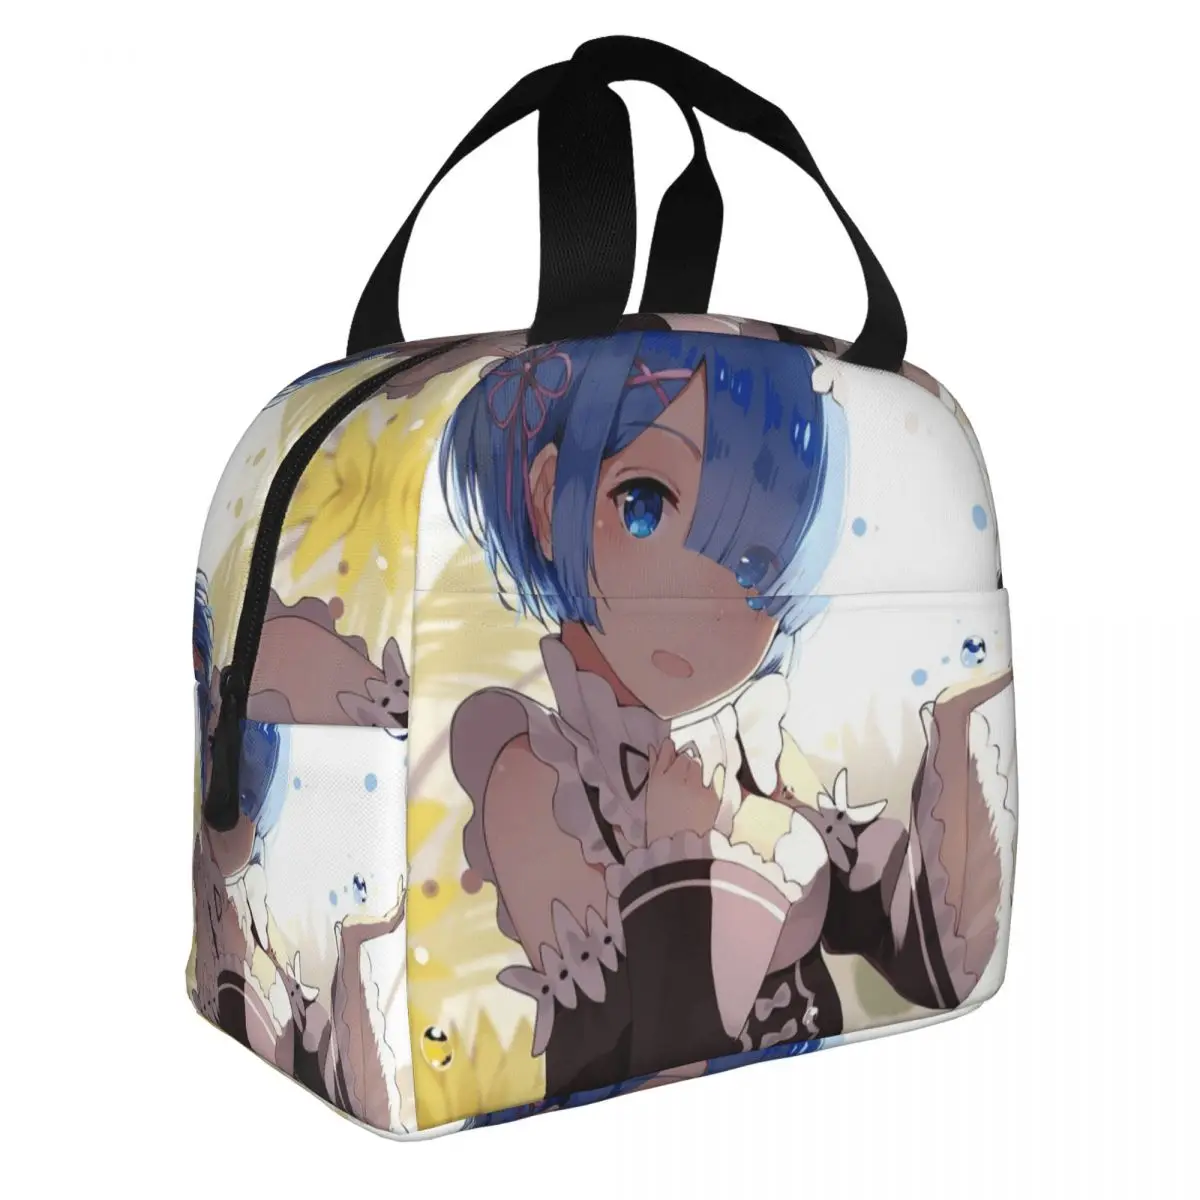 Ram And Rem Re Zero Subaru Natsuki Lunch Bento Bags Portable Aluminum Foil thickened Thermal Cloth Lunch Bag for Women Men Boy